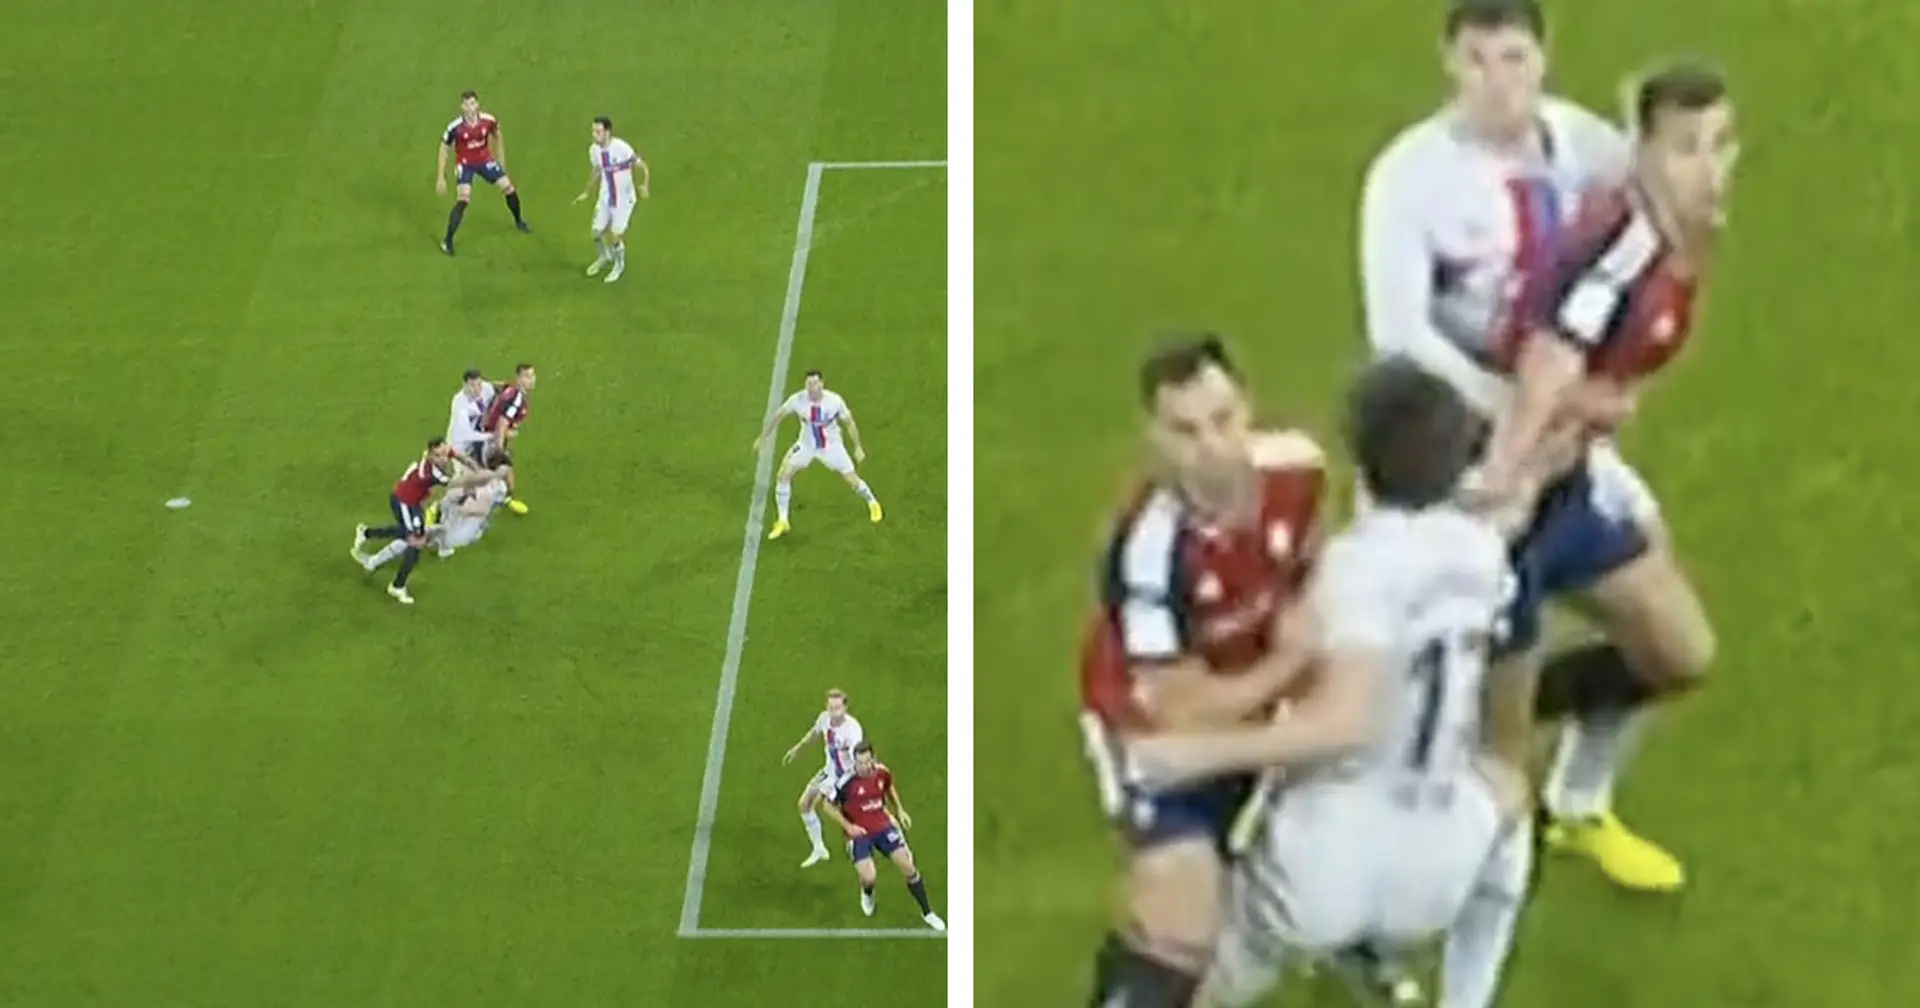 Spotted: Alonso pushed down by Osasuna player before opening goal